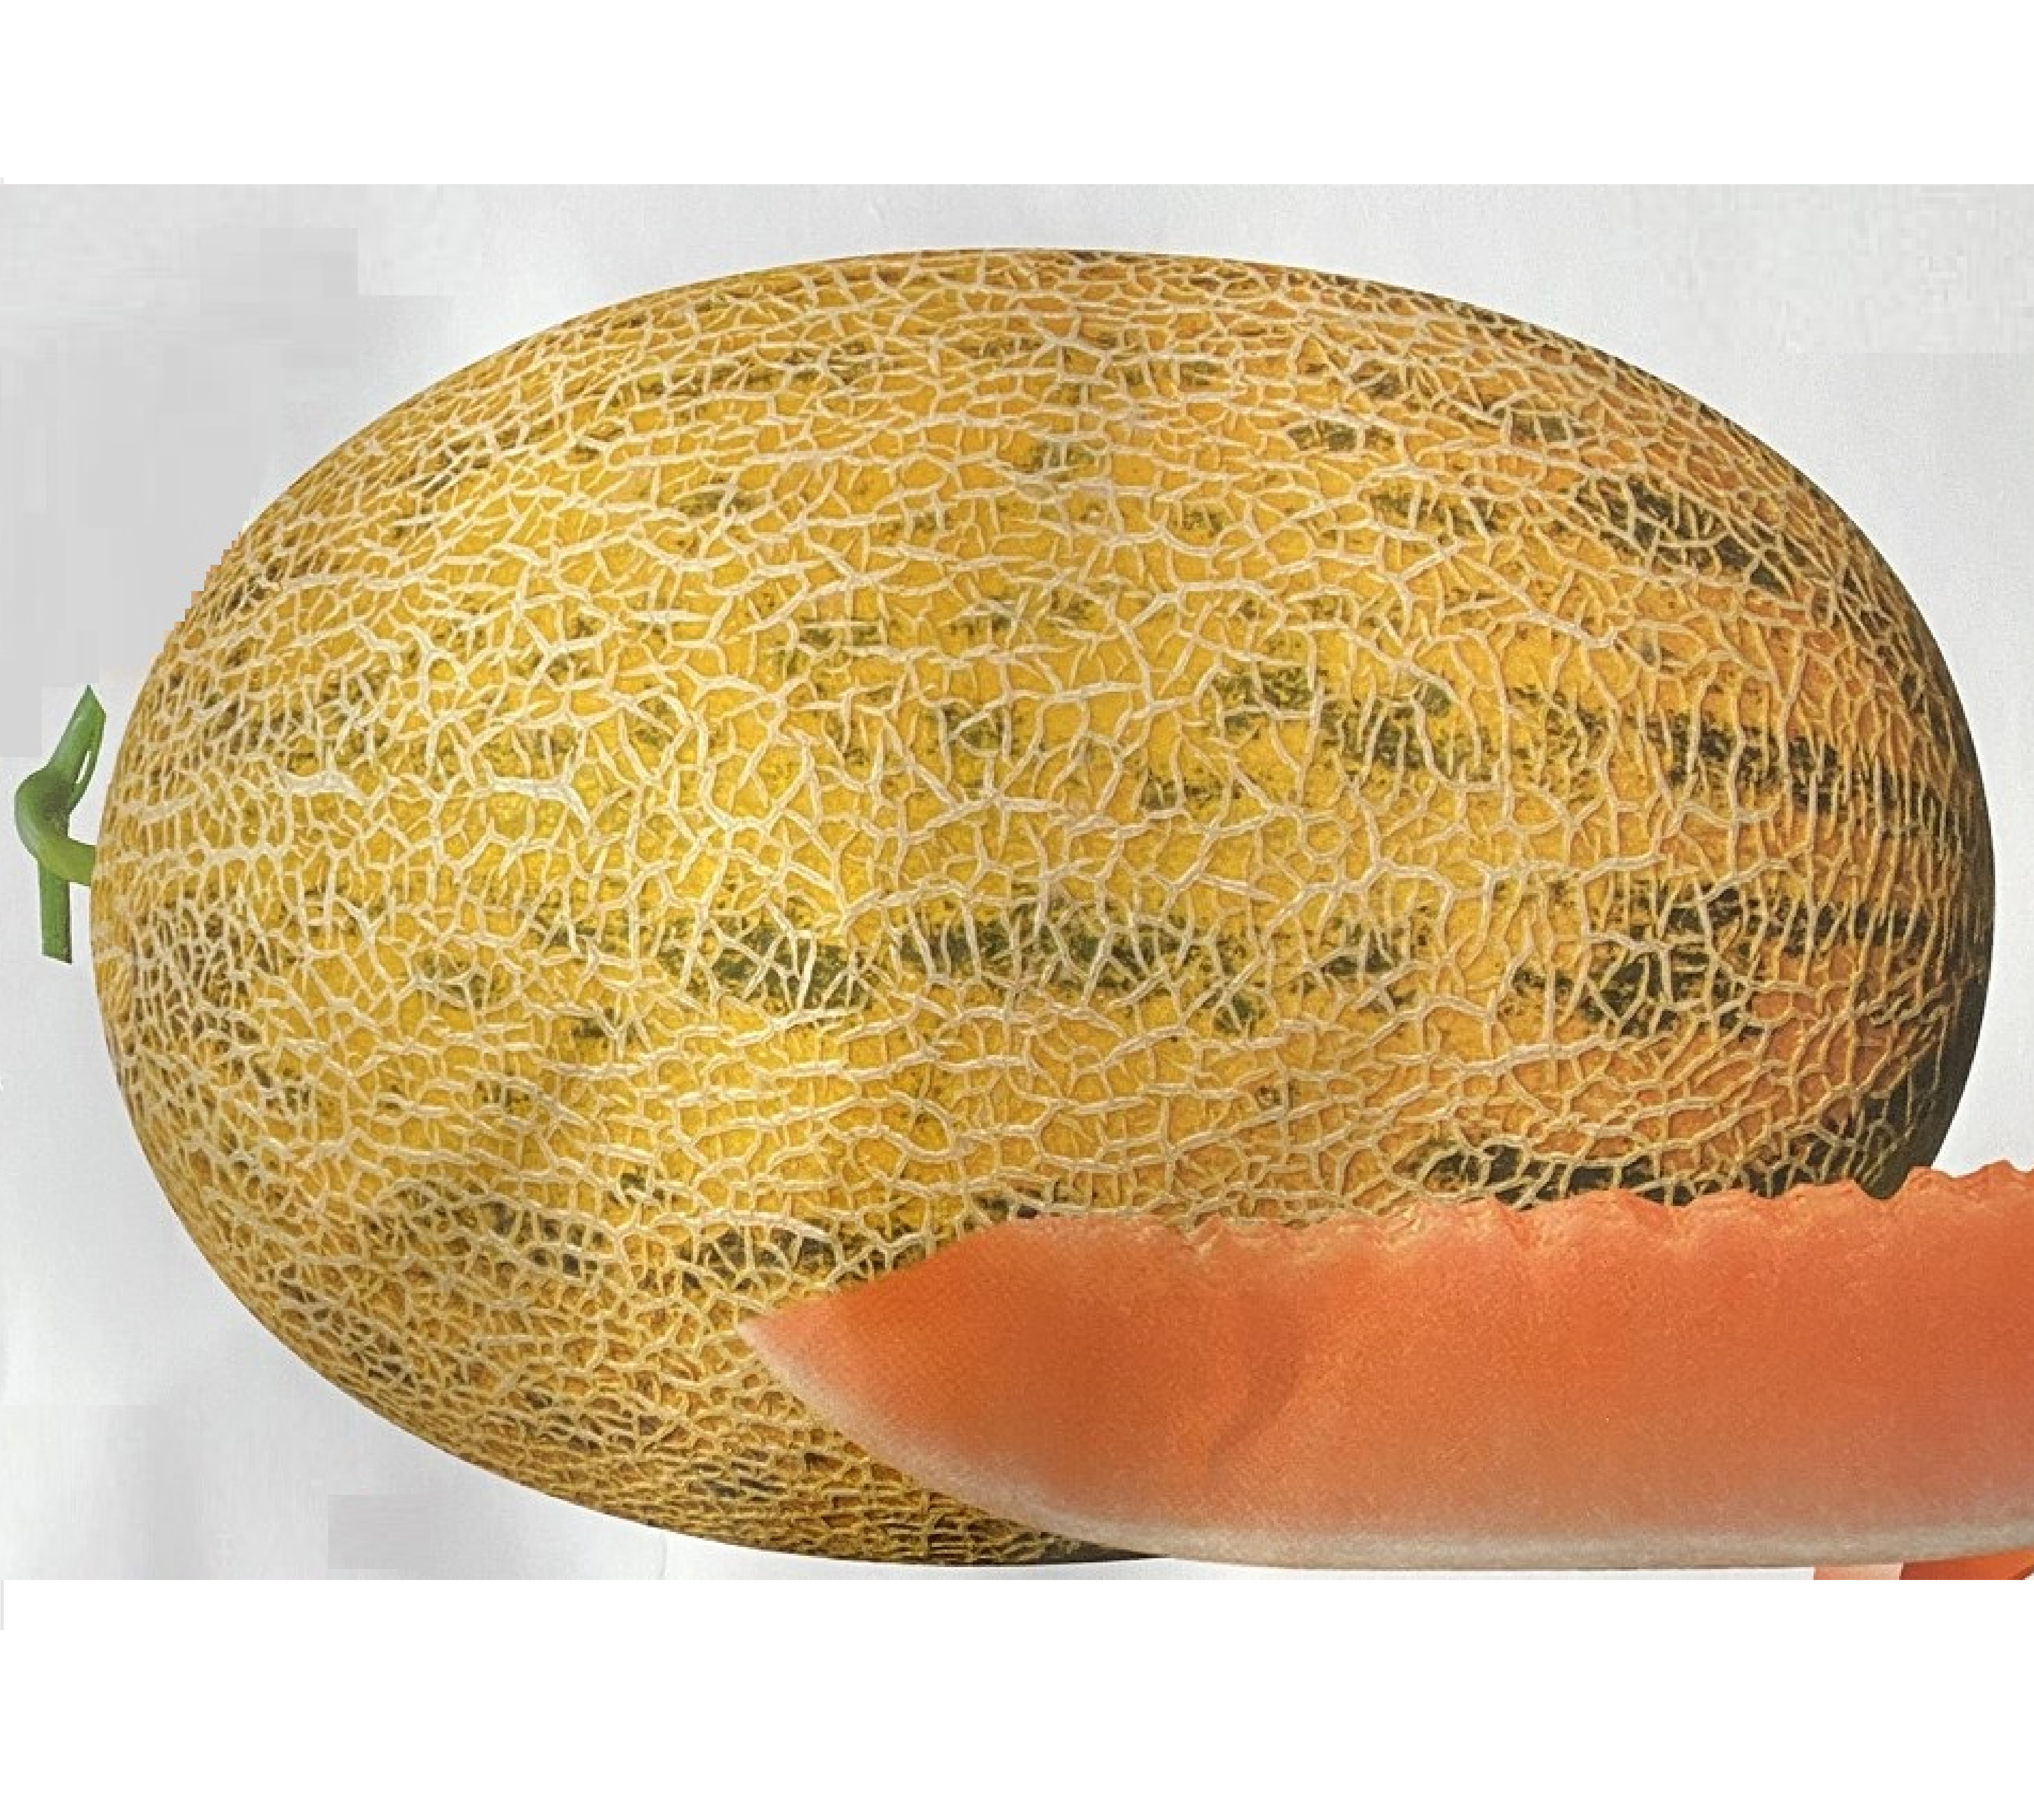 High quality melon seeds for wholesale